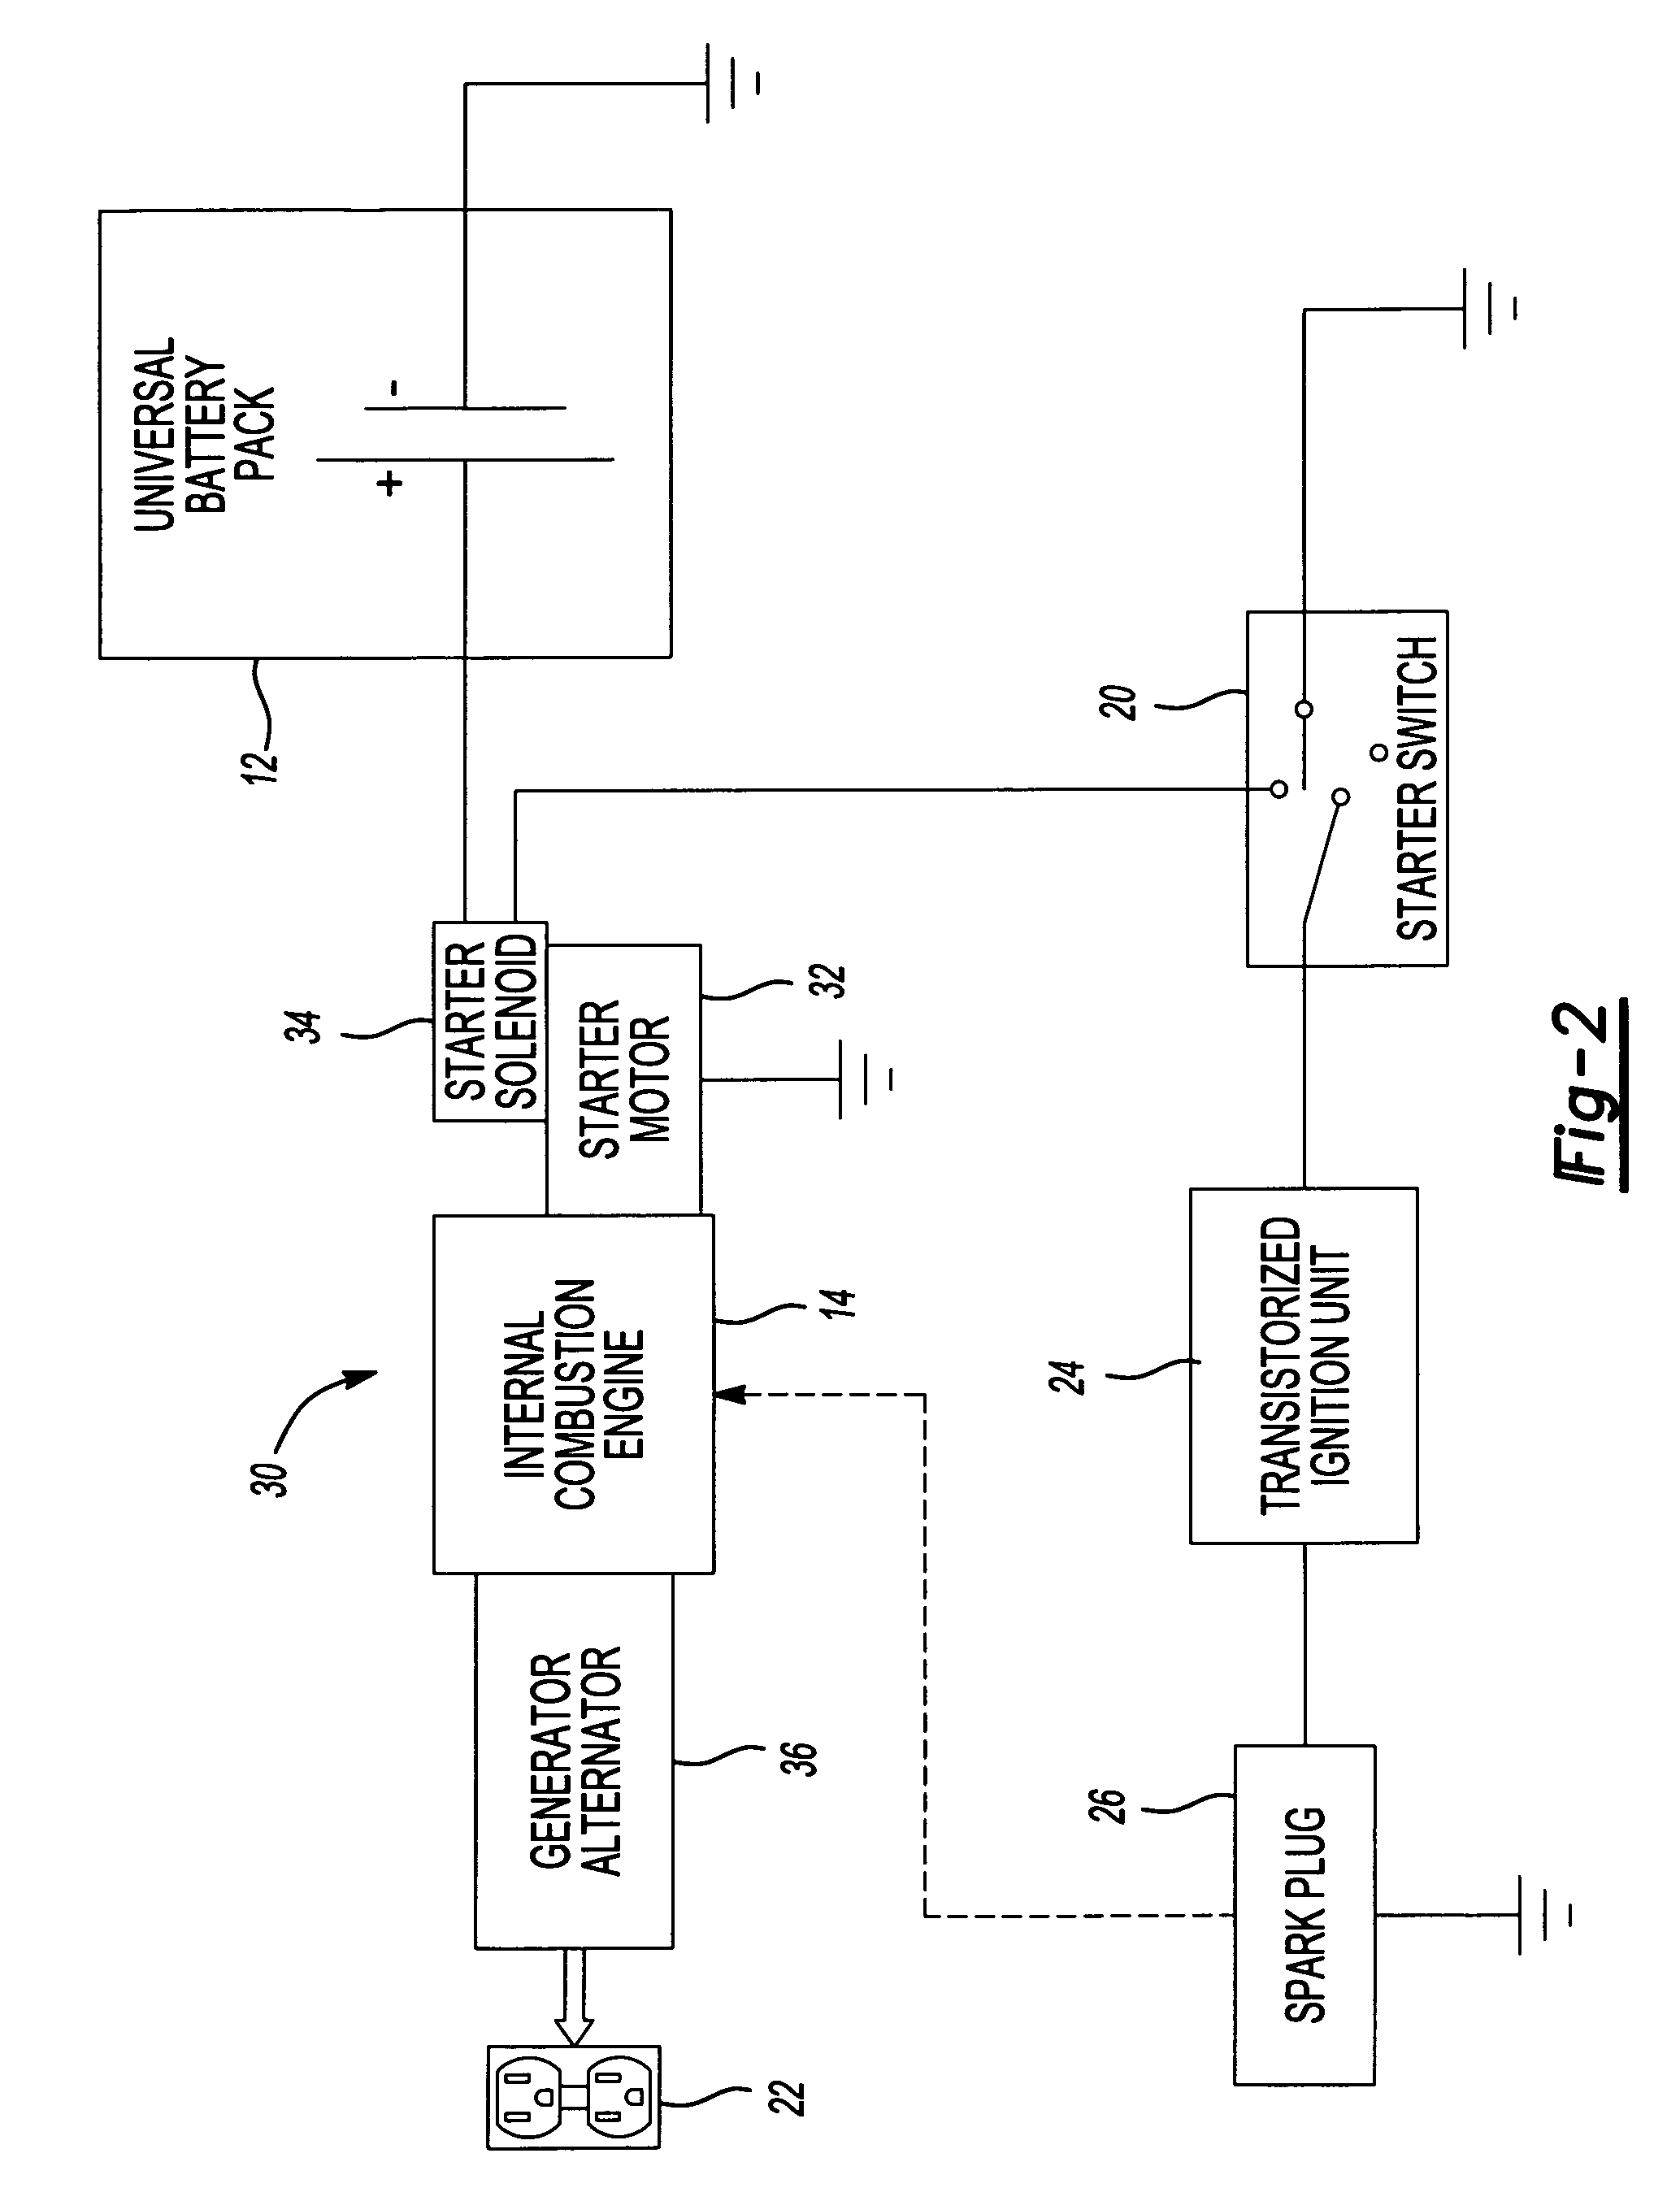 Starter system for portable internal combustion engine electric generators using a portable universal battery pack